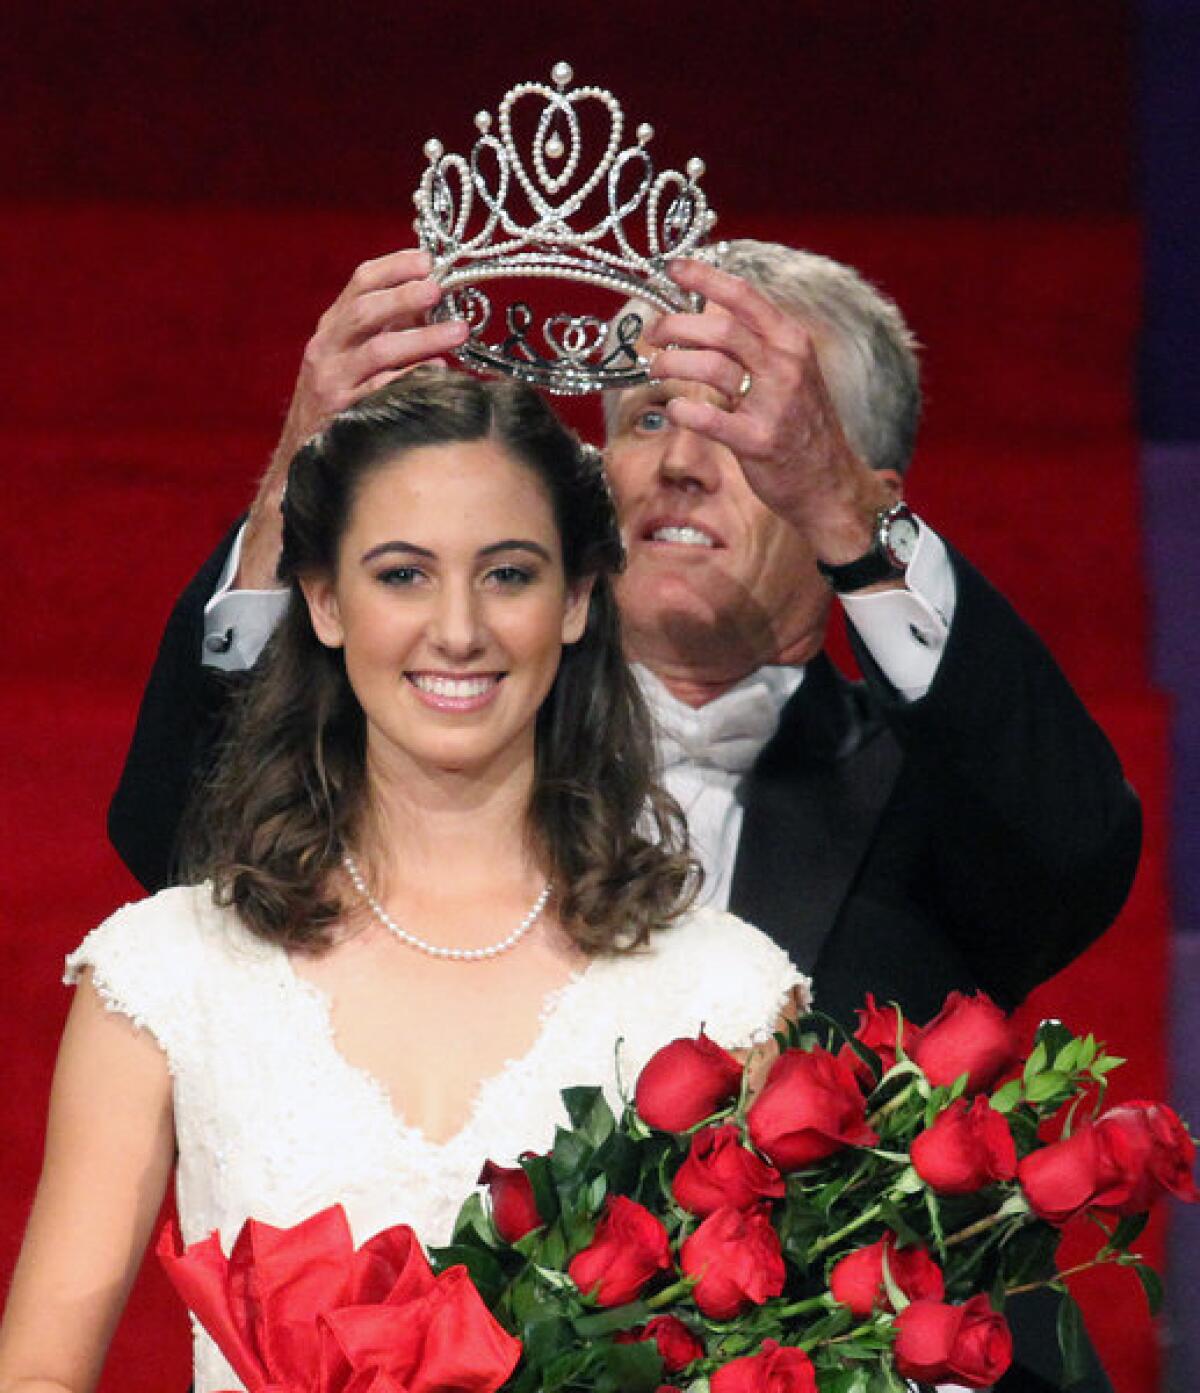 Rose Queen Ana Acosta is crowned by Pasadena Tournament of Roses President R. Scott Jenkins at the announcement and coronation of the 2014 Tournament of Roses Rose Queen at First Church of the Nazarene of Pasadena on Thursday, October 24, 2013. The Rose Queen is Ana Acosta of Polytechnic School in Pasadena. (Tim Berger/Staff Photographer)